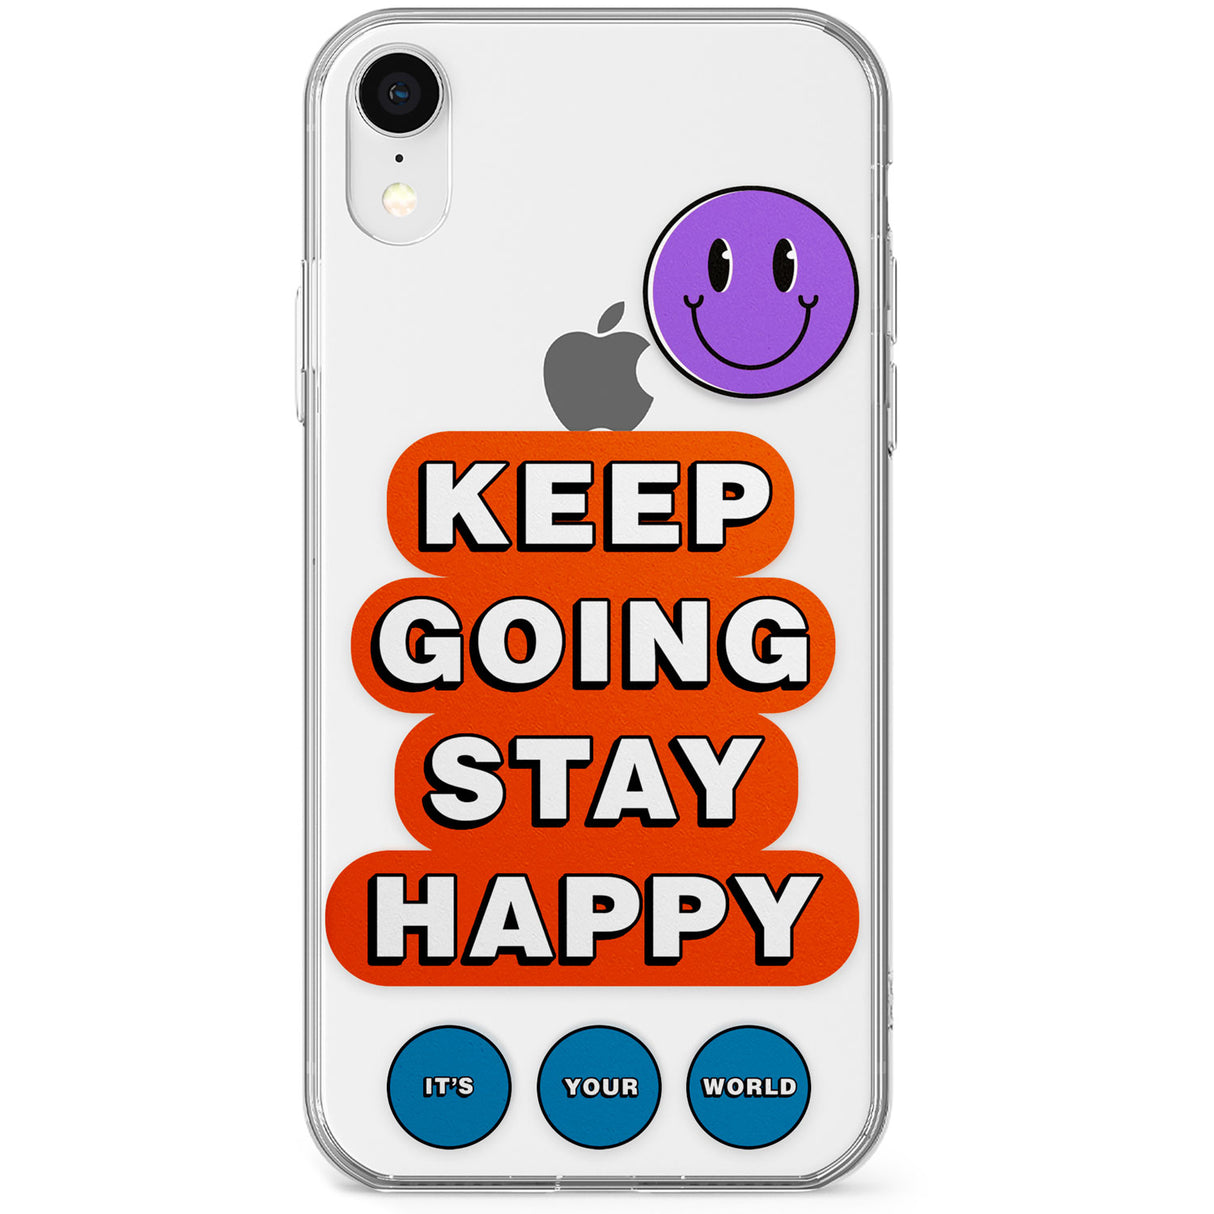 Keep Going Stay Happy Phone Case for iPhone X, XS Max, XR